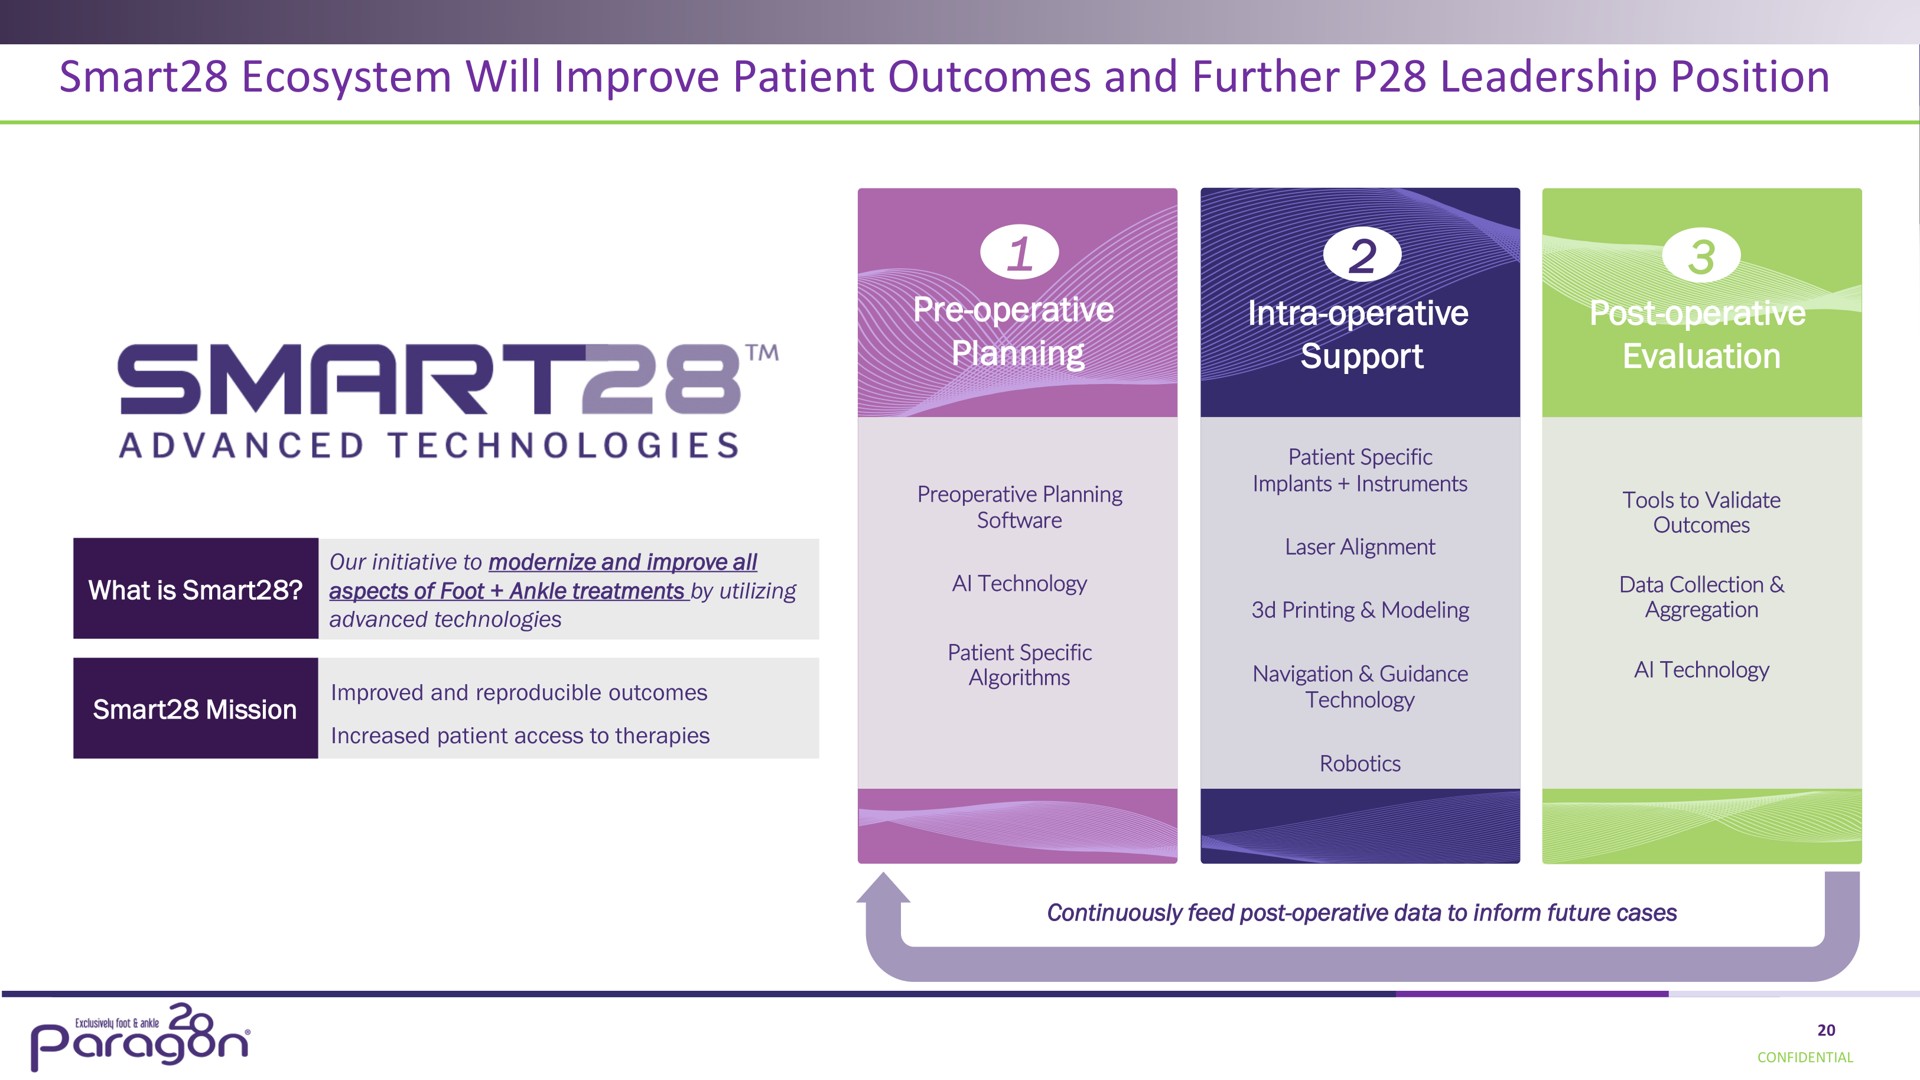 smart ecosystem will improve patient outcomes and further leadership position smartes | Paragon28